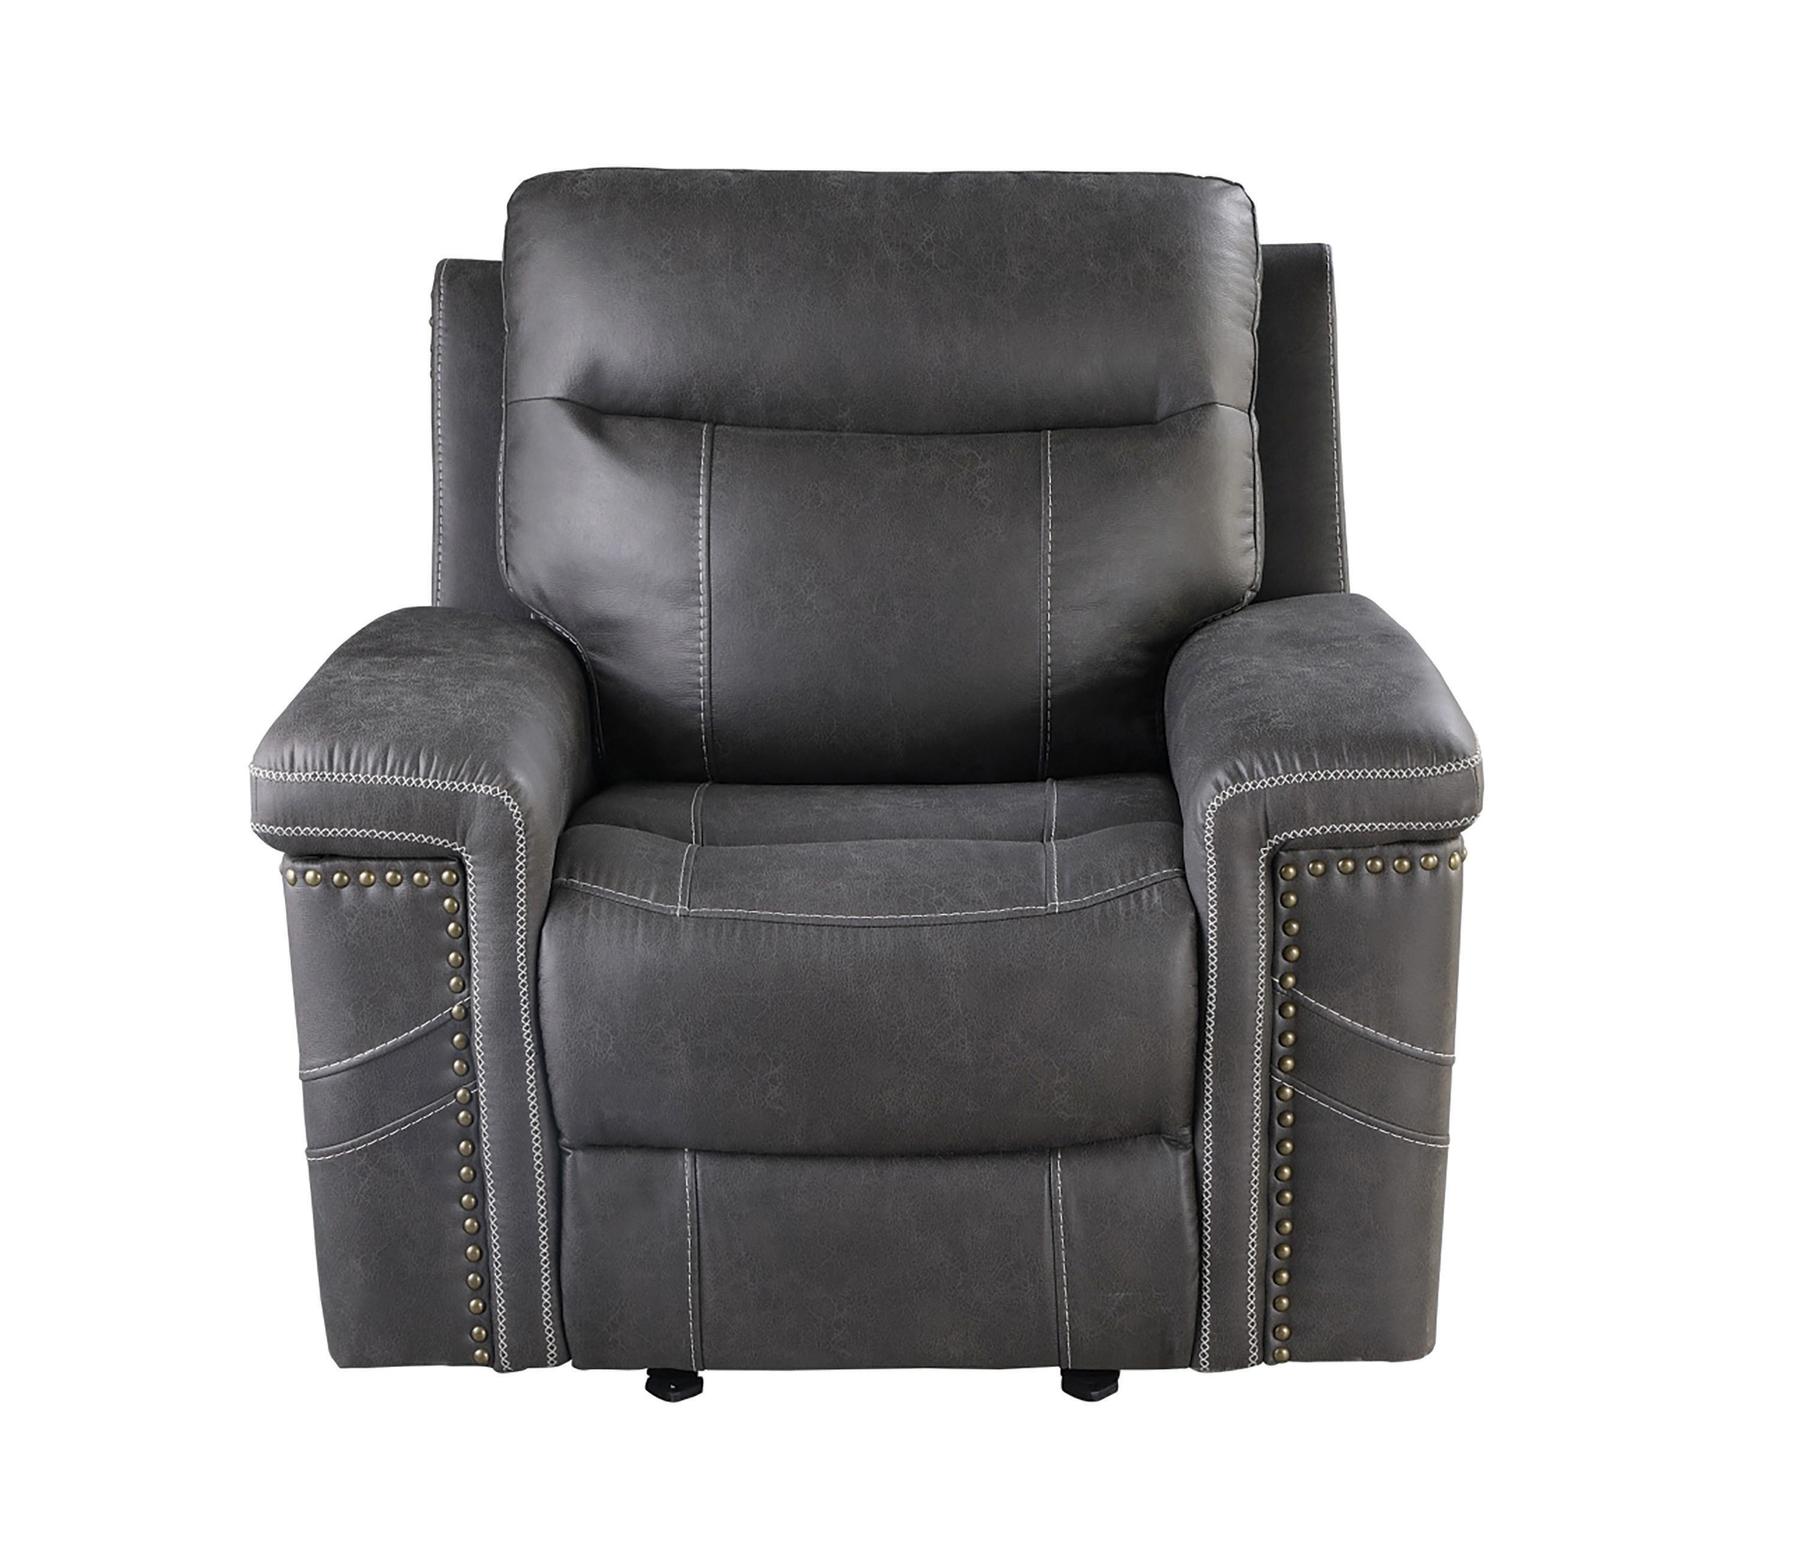 Coaster 603516PP Wixom Power recliner